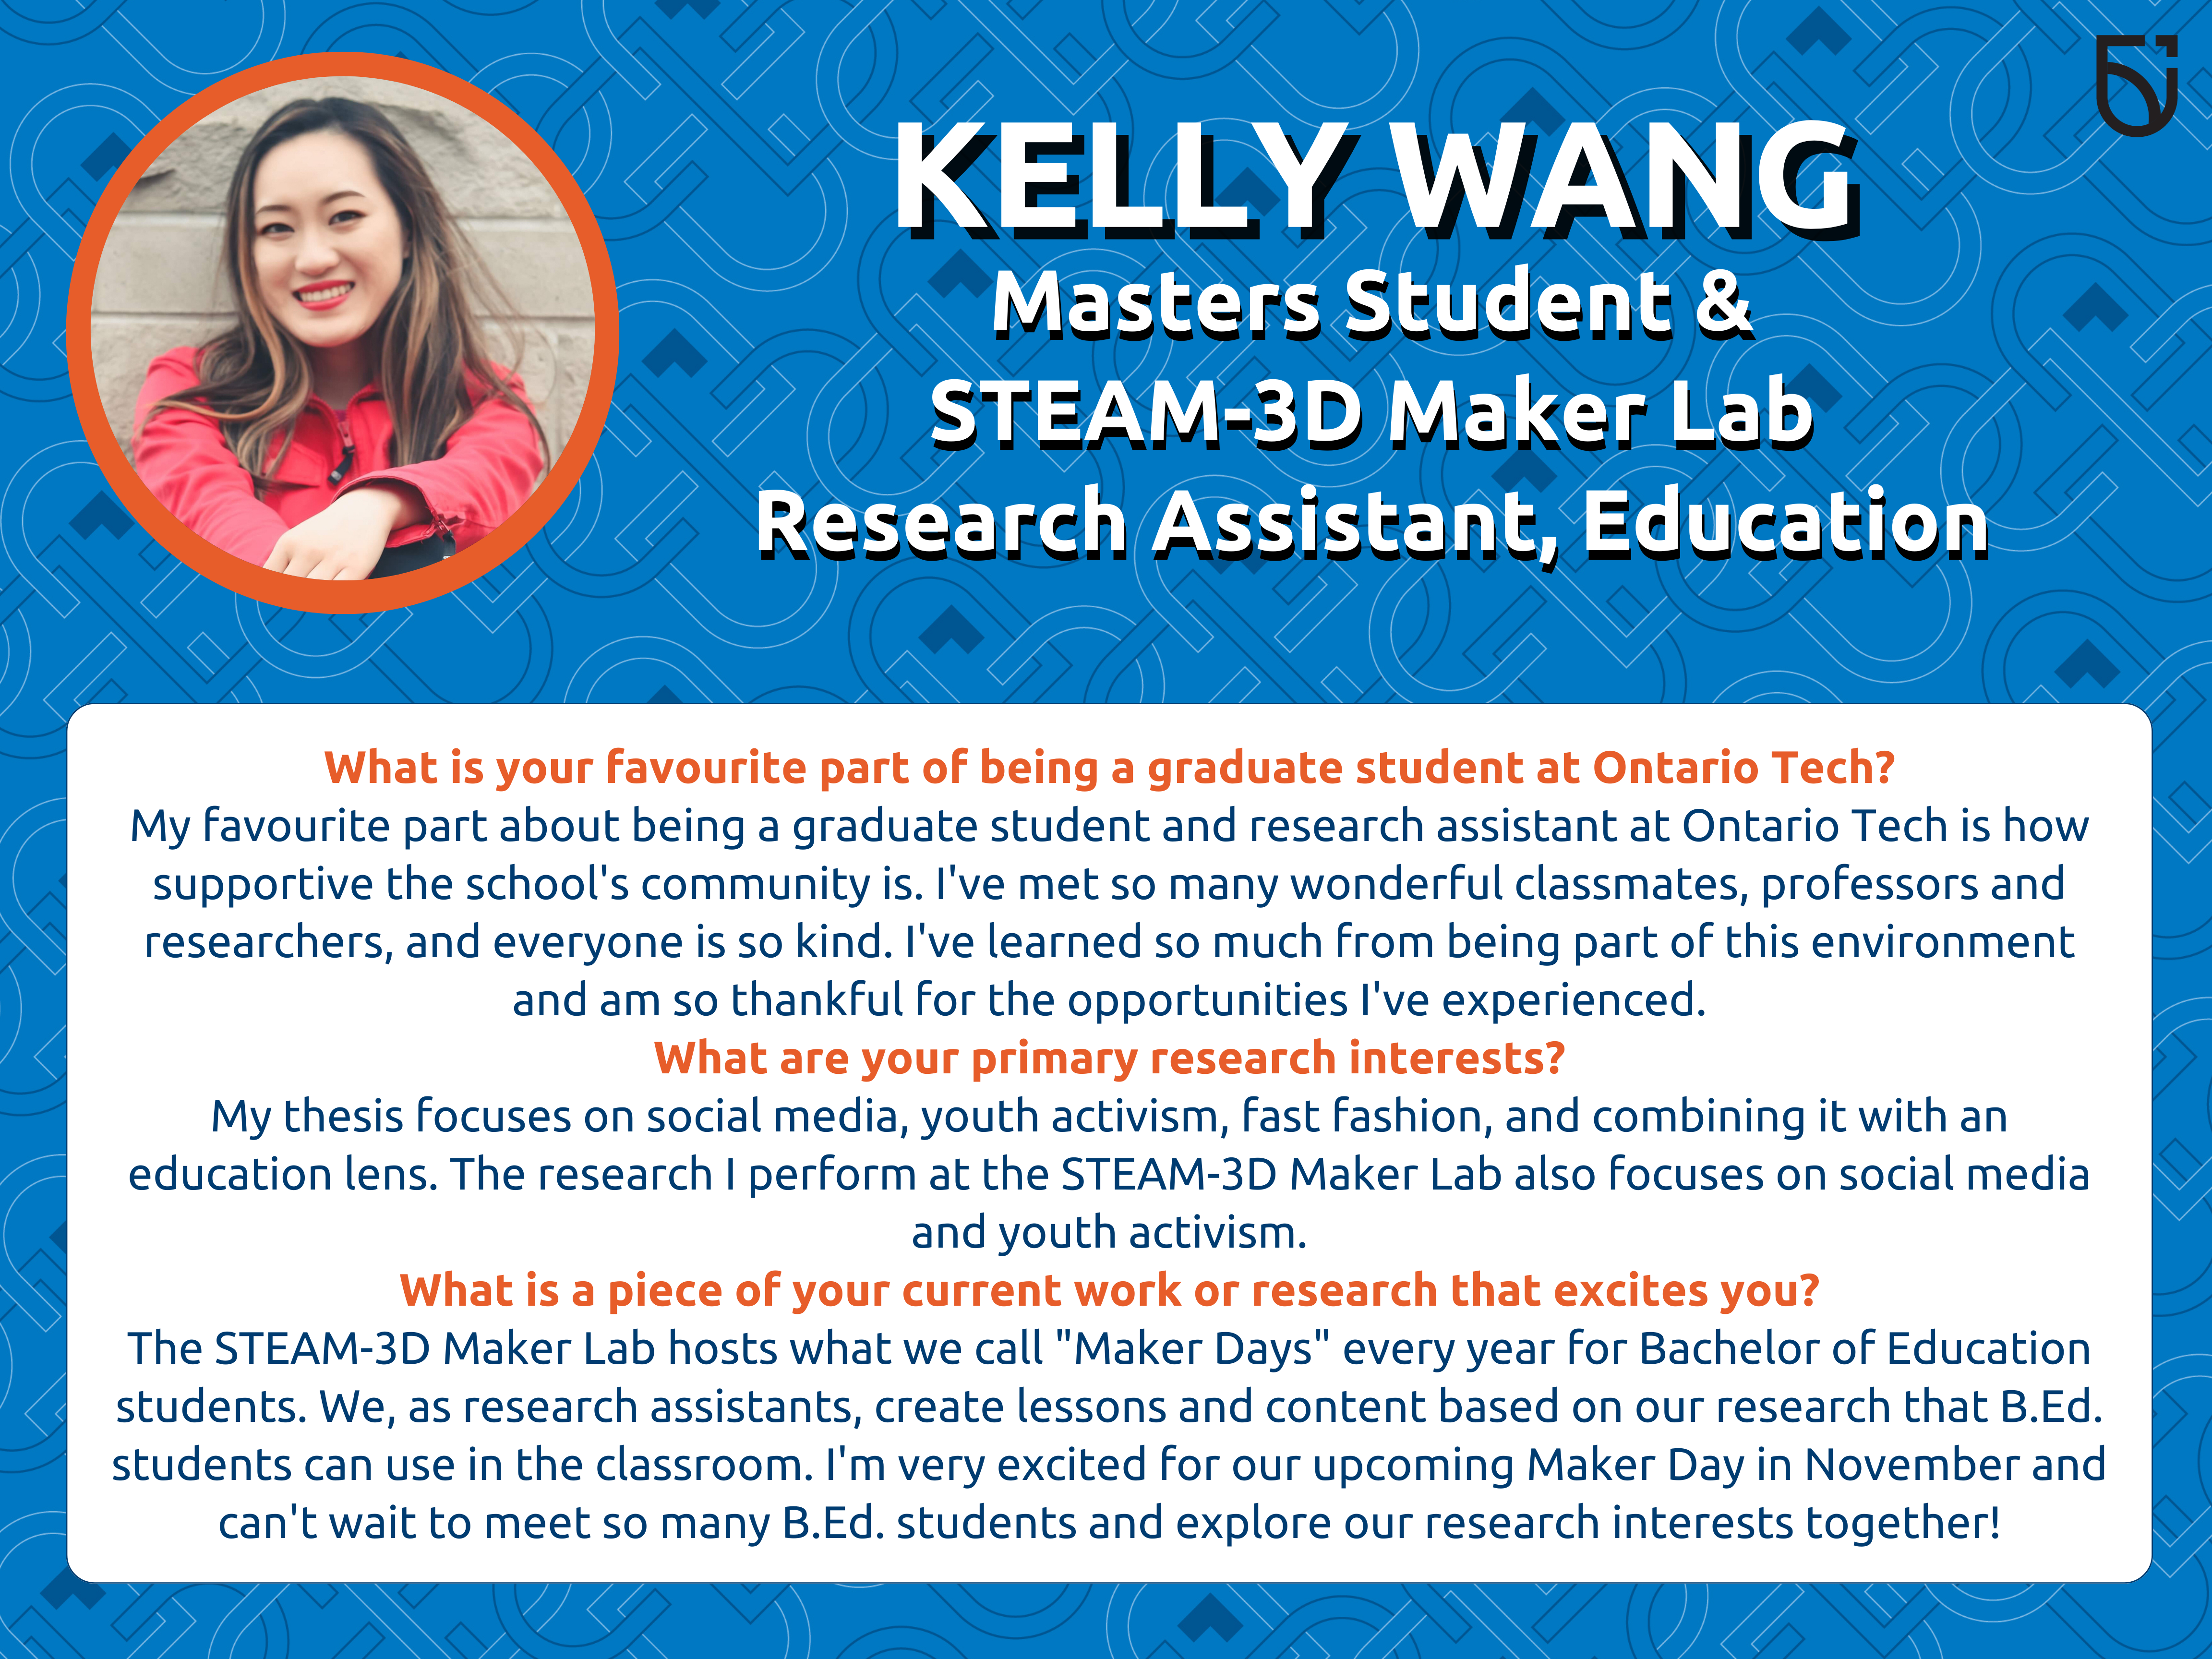 This photo is a Women’s Wednesday feature of Kelly Wang, a Masters Student and STEAM 3D-Maker Lab Research Assistant in the Mitch and Leslie Frazer Faculty of Education